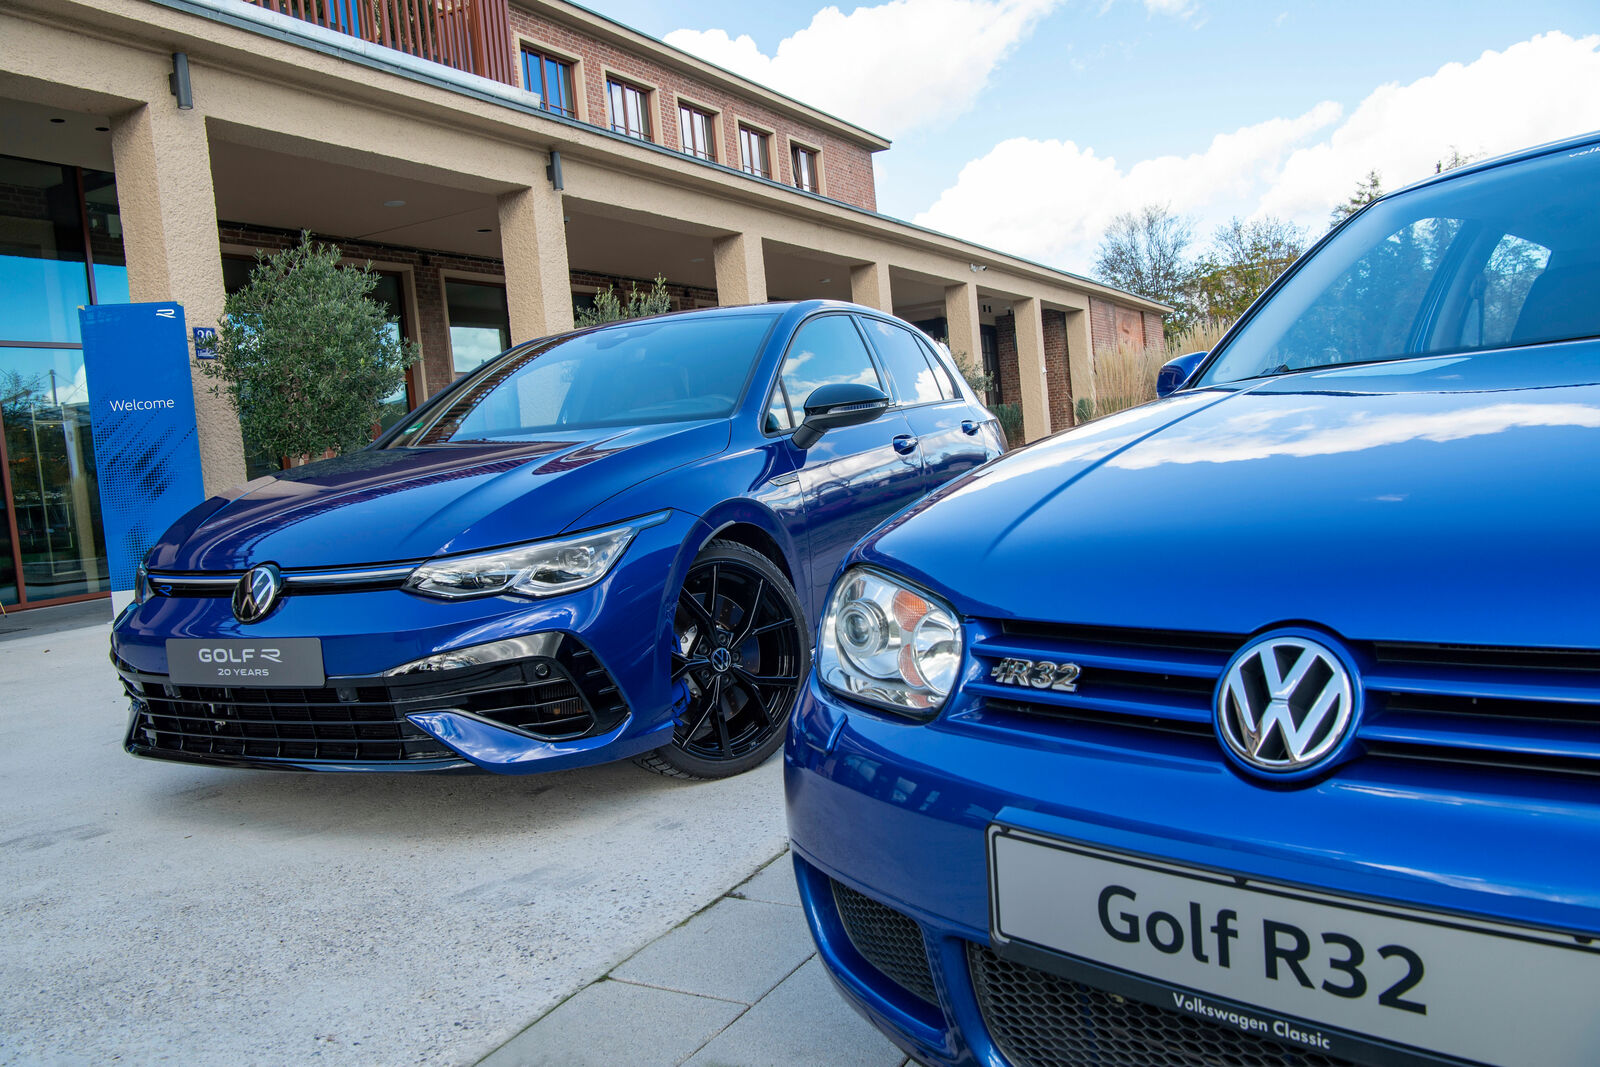 Volkswagen Golf R „20 Years“ and Golf R32